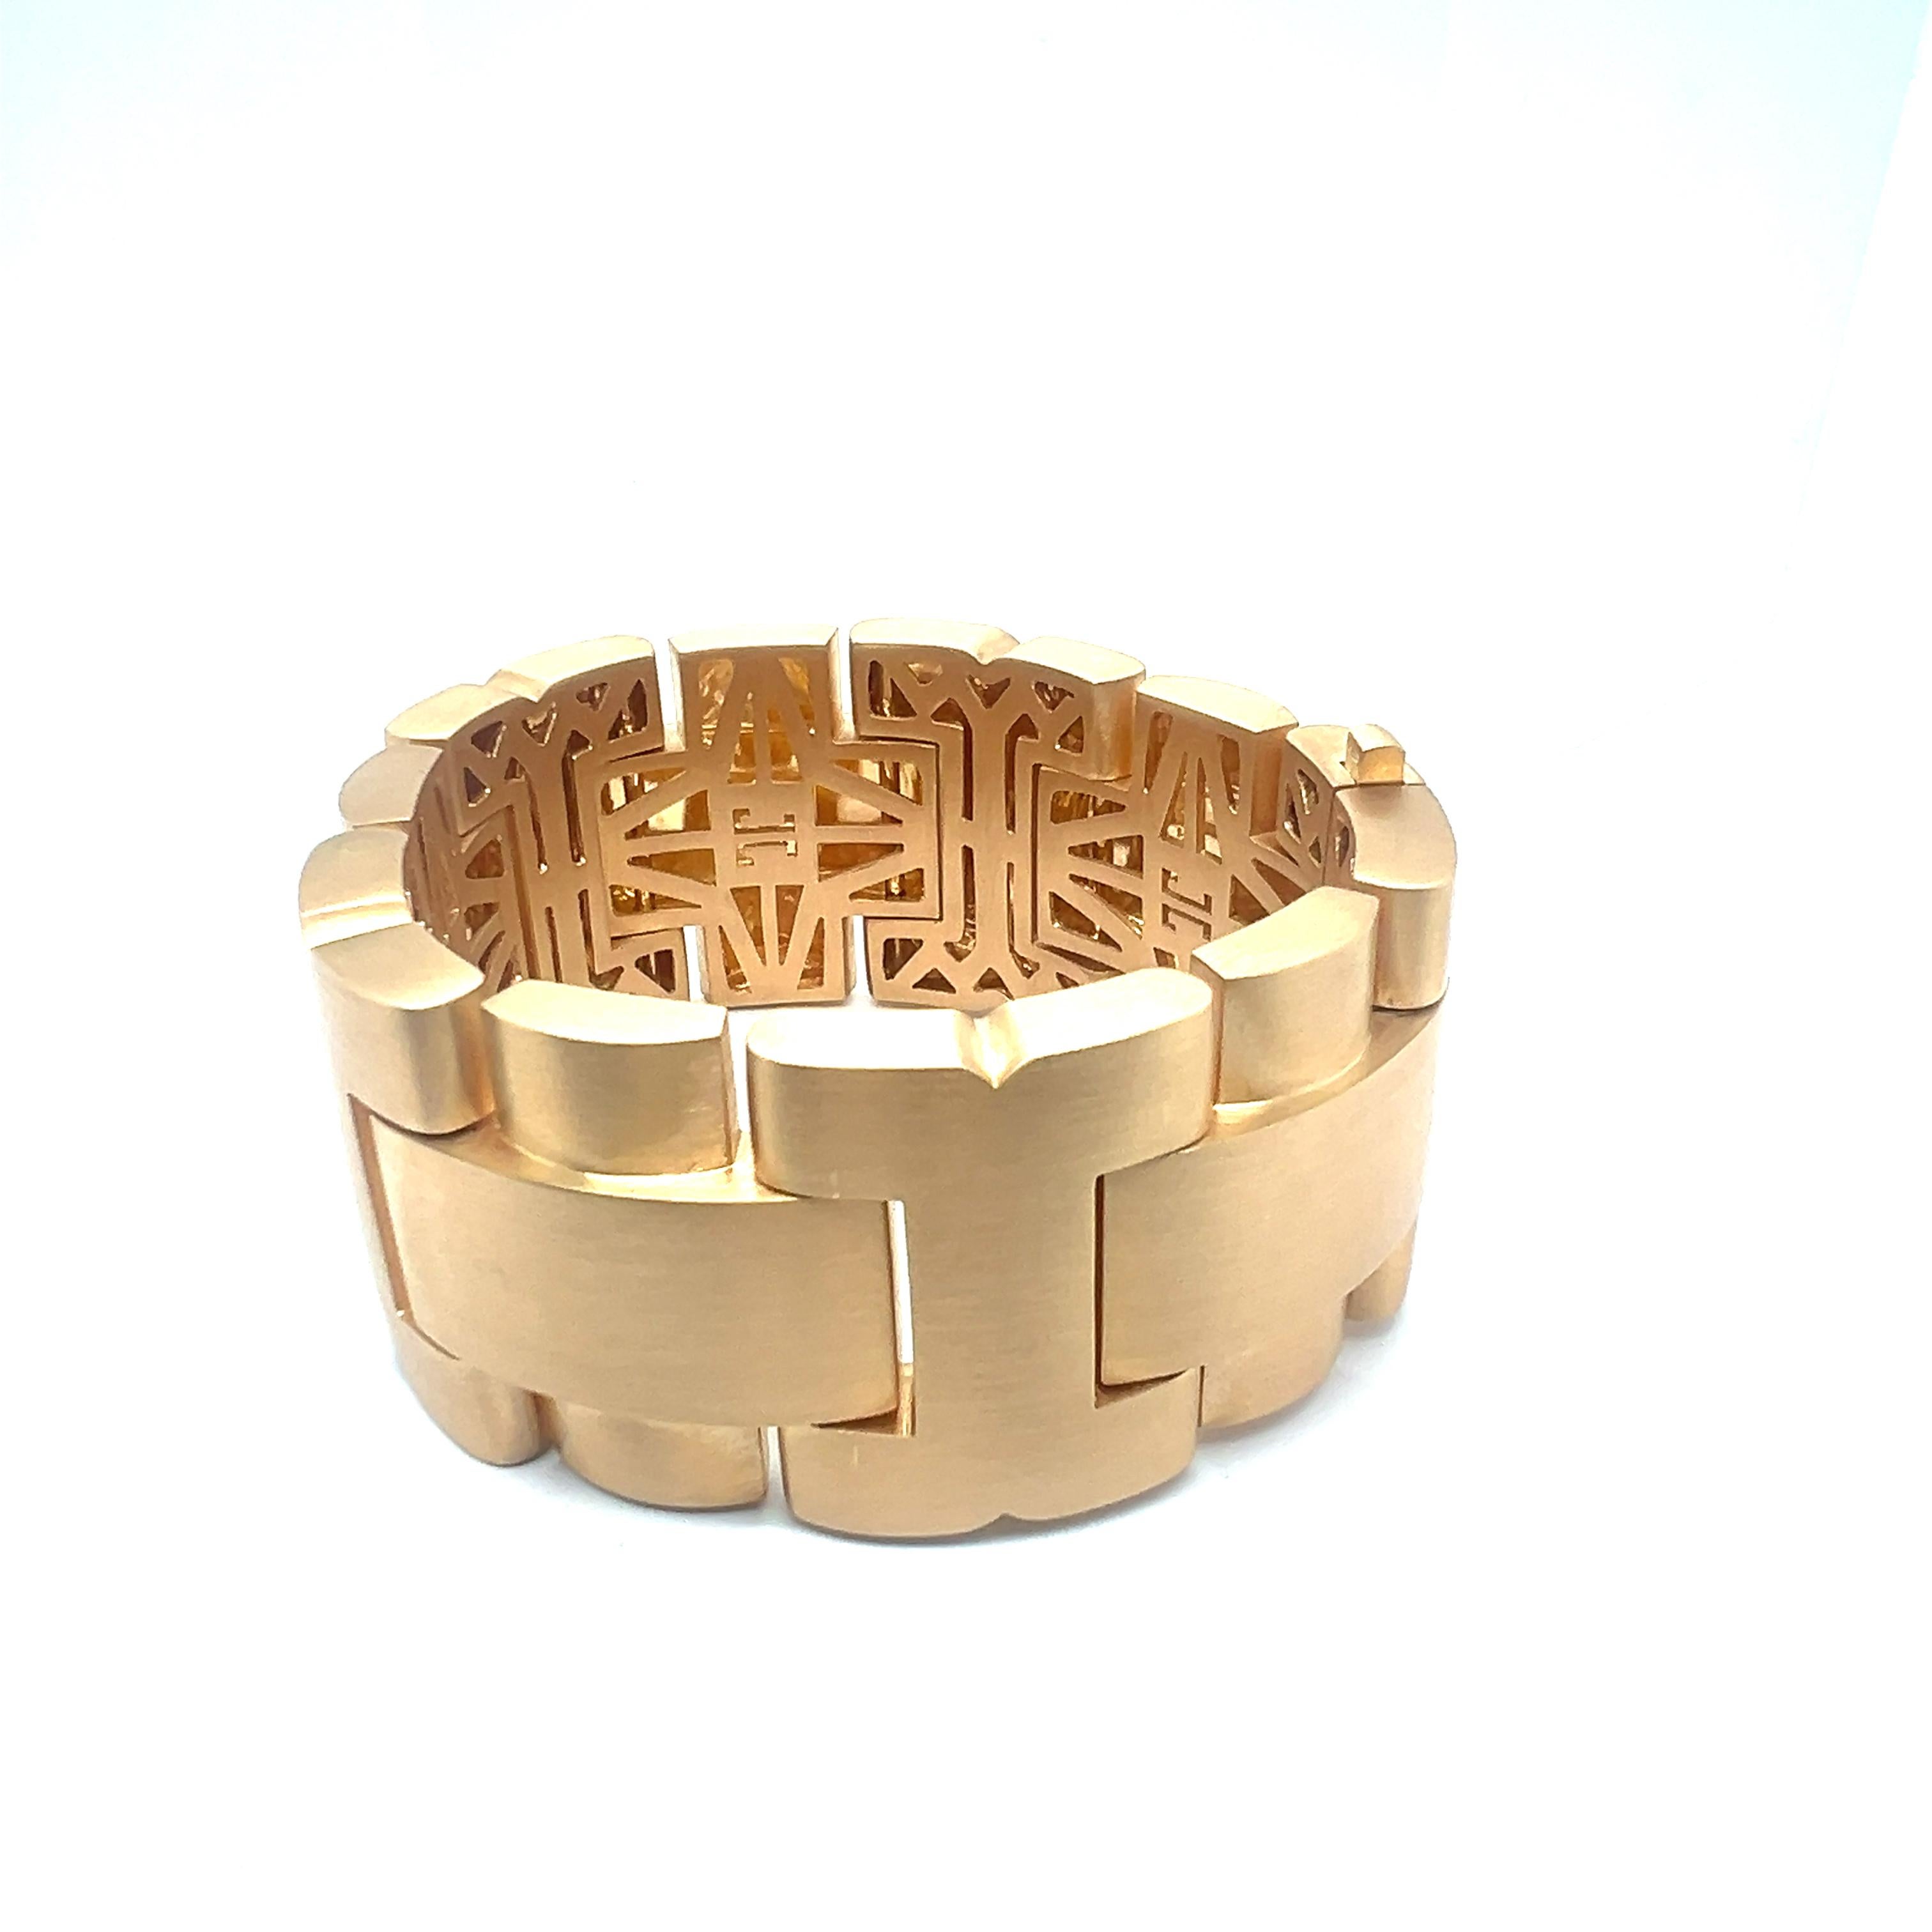 Introducing our stunning 18 Karat rose gold bracelet, a mesmerizing creation fashioned from solid links, embellished with a detailed internal graphic pattern. Despite its impressive weight of 190.79 grams, the bracelet gracefully accentuates the